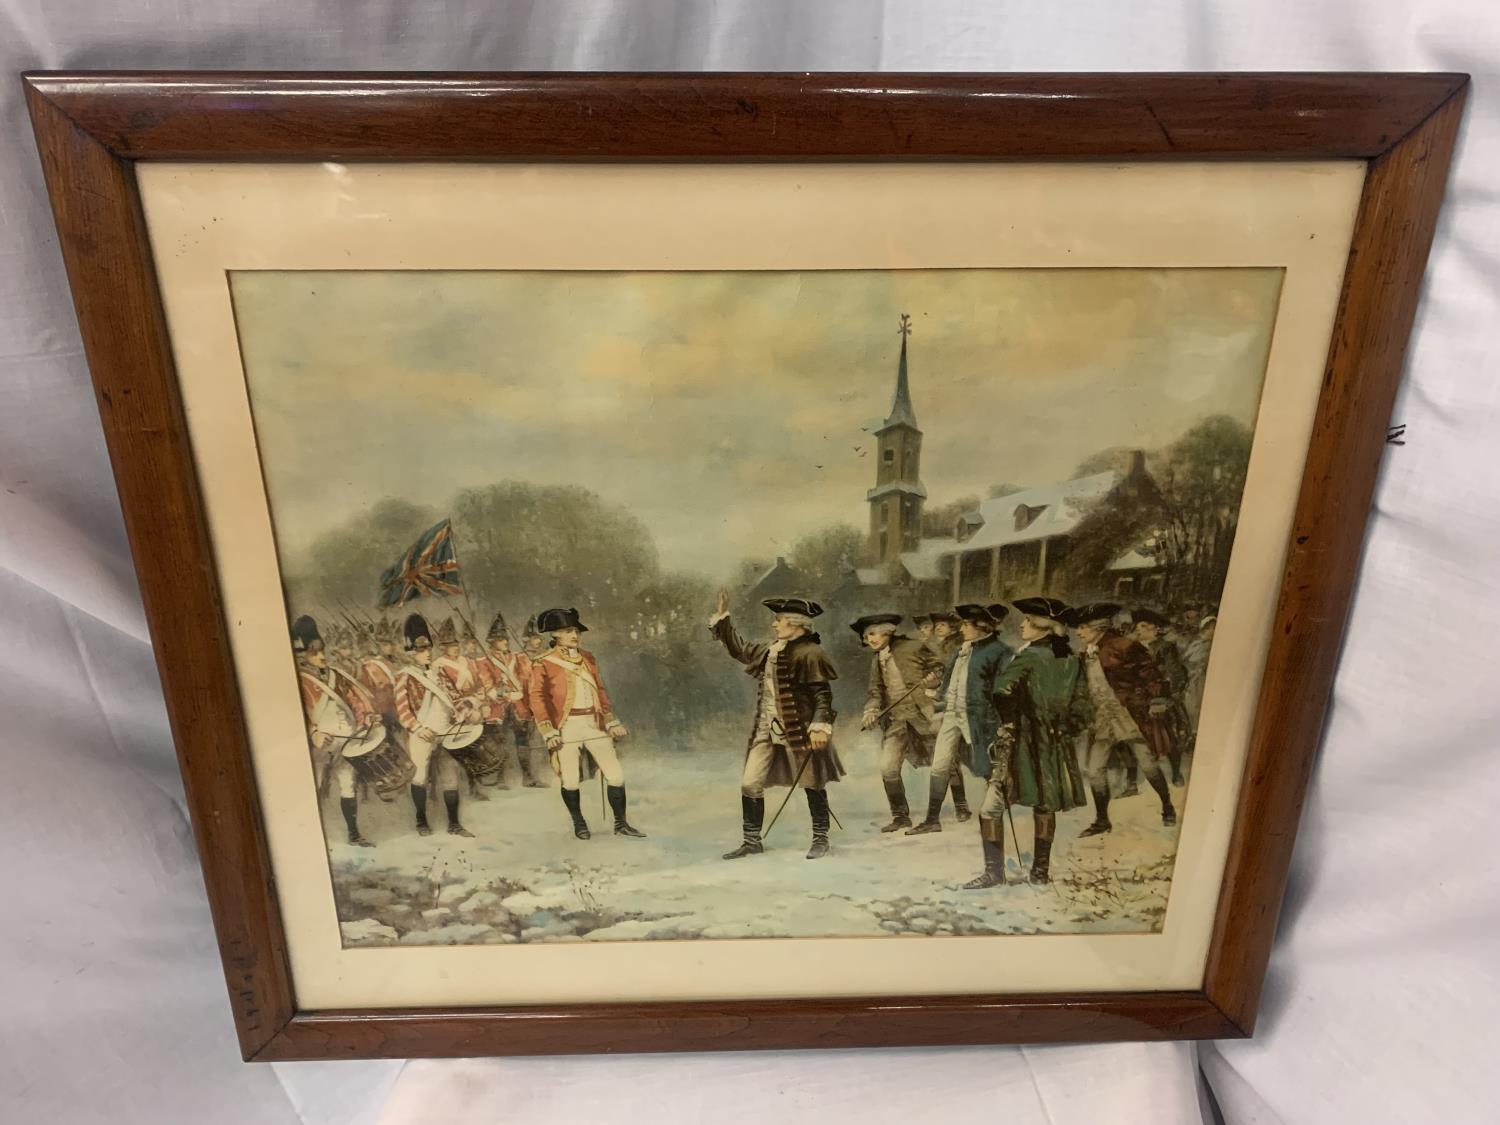 A FRAMED PICTURE OF THE RED COATS AND PATRIOTS AMERICAN REVOLUTIONARY WAR - Image 2 of 6